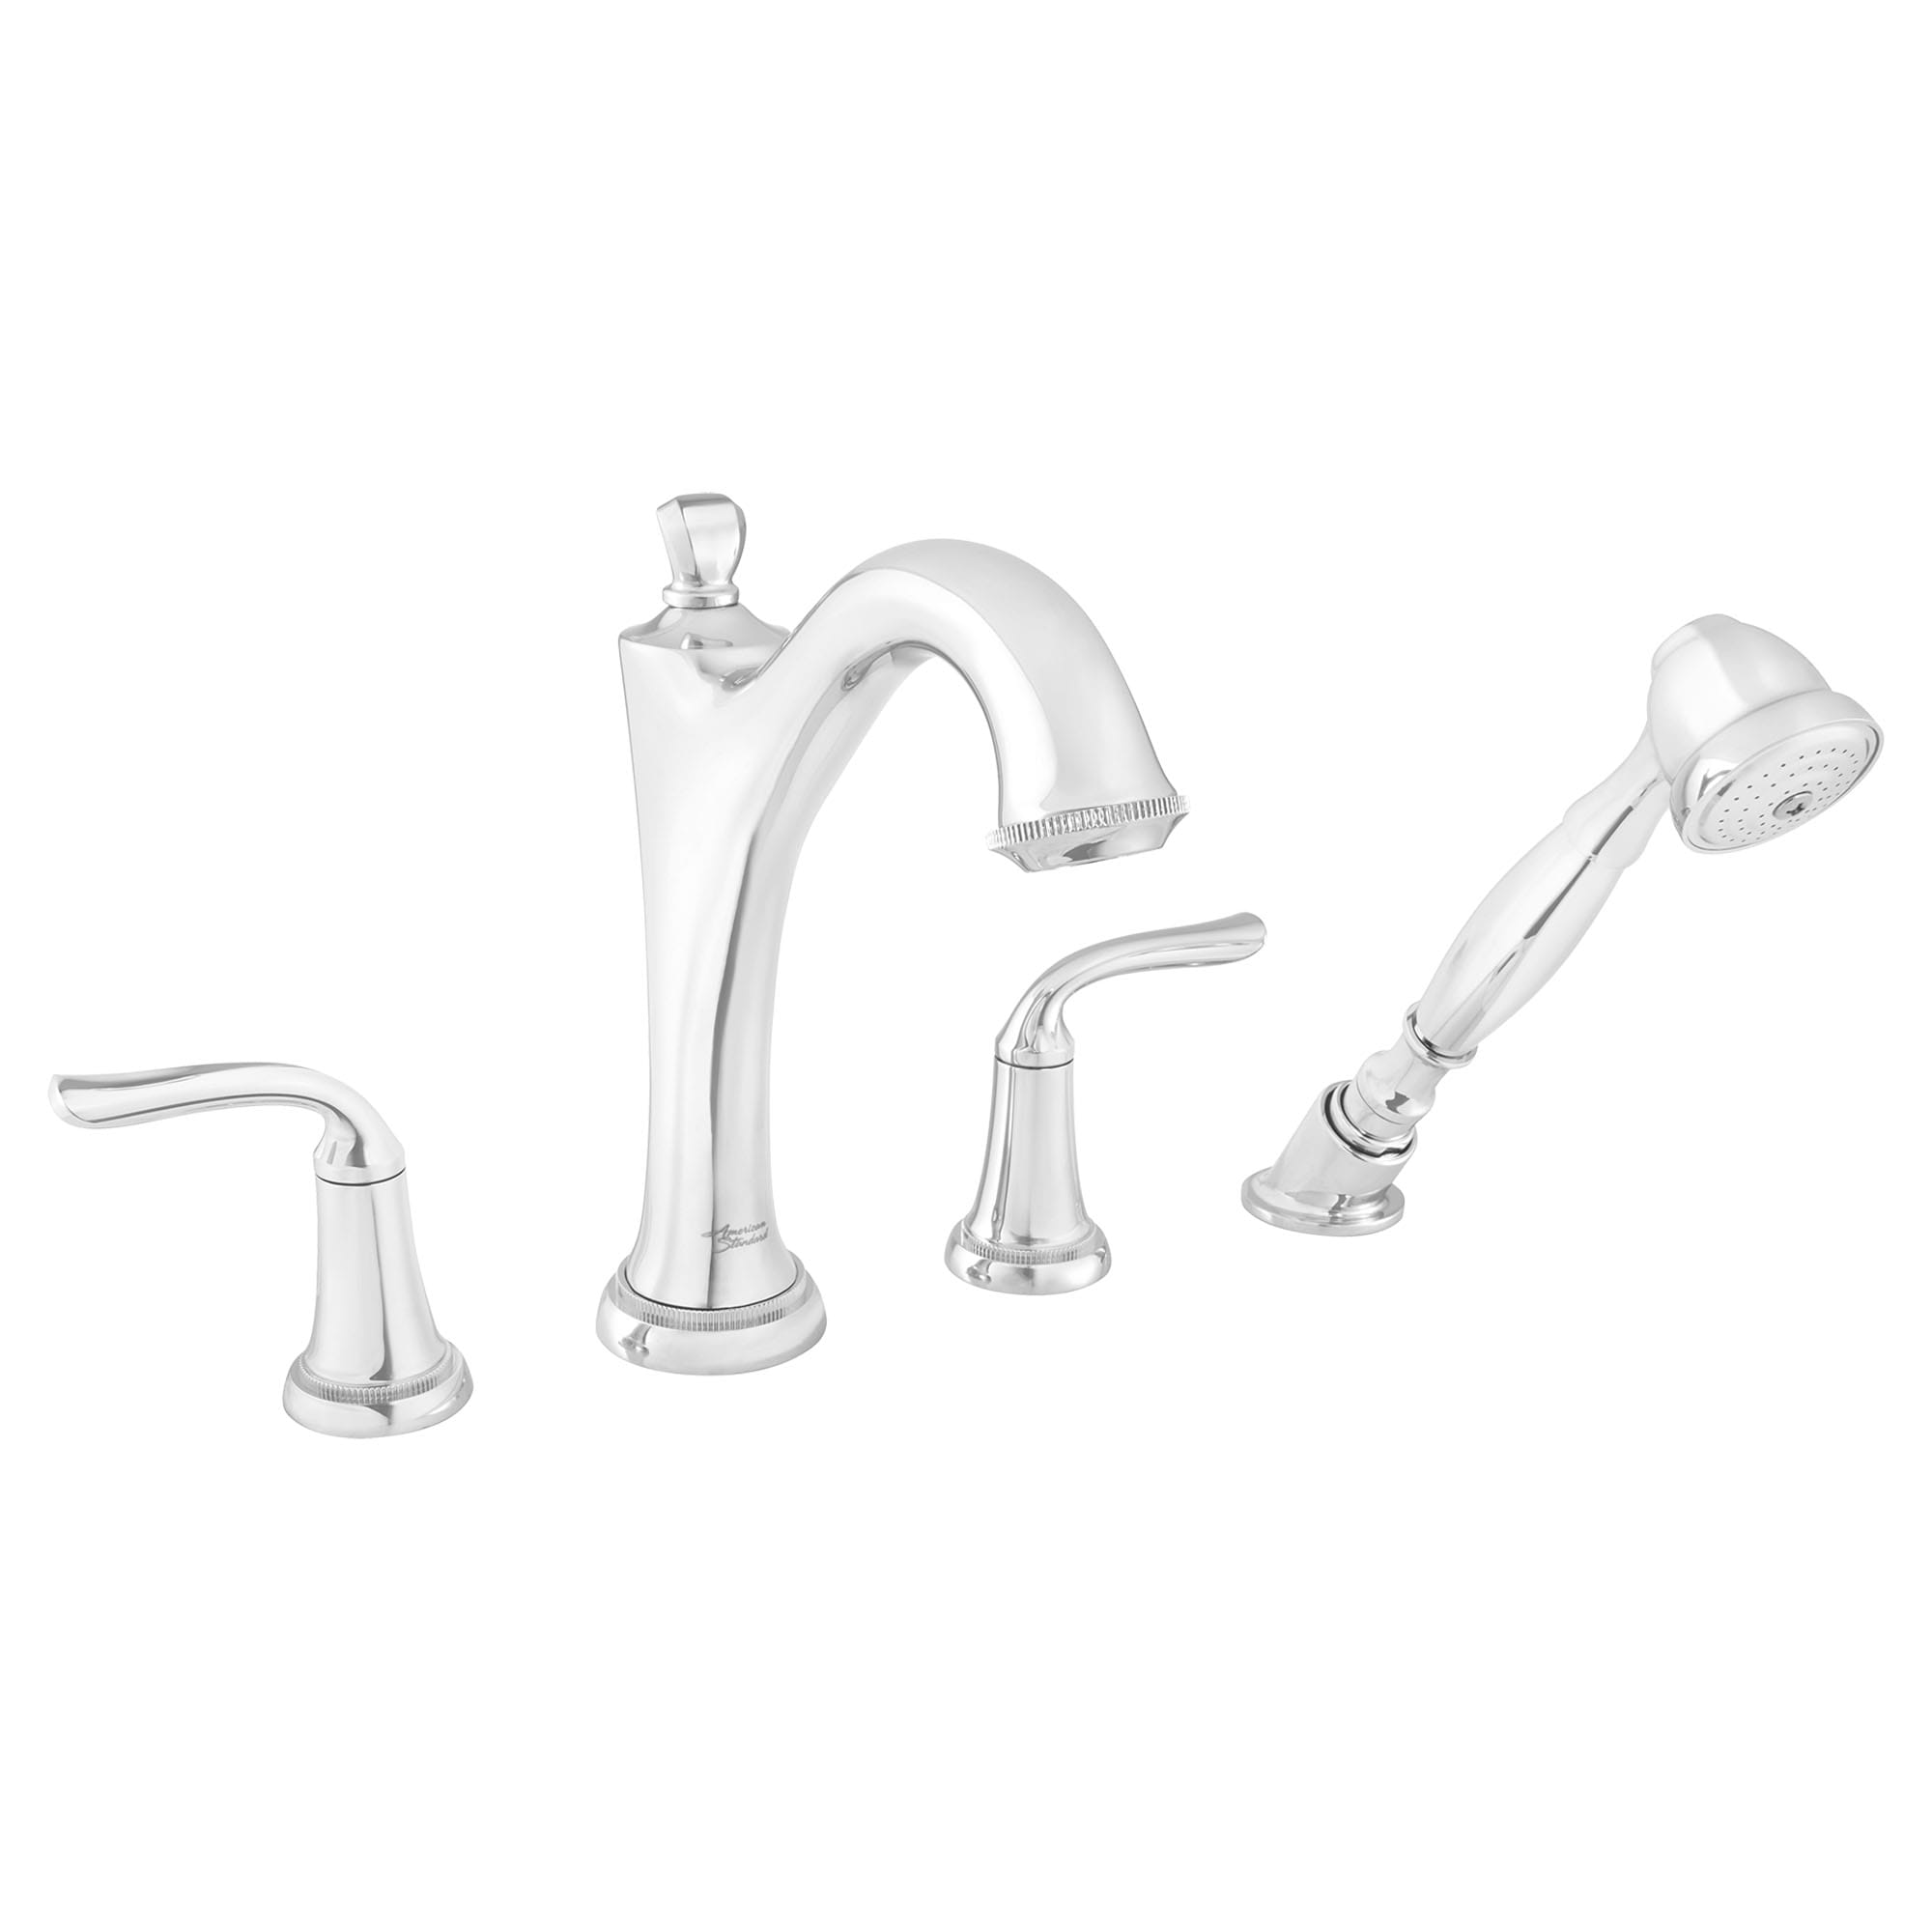 Patience Roman Tub Faucet with Hand Shower CHROME